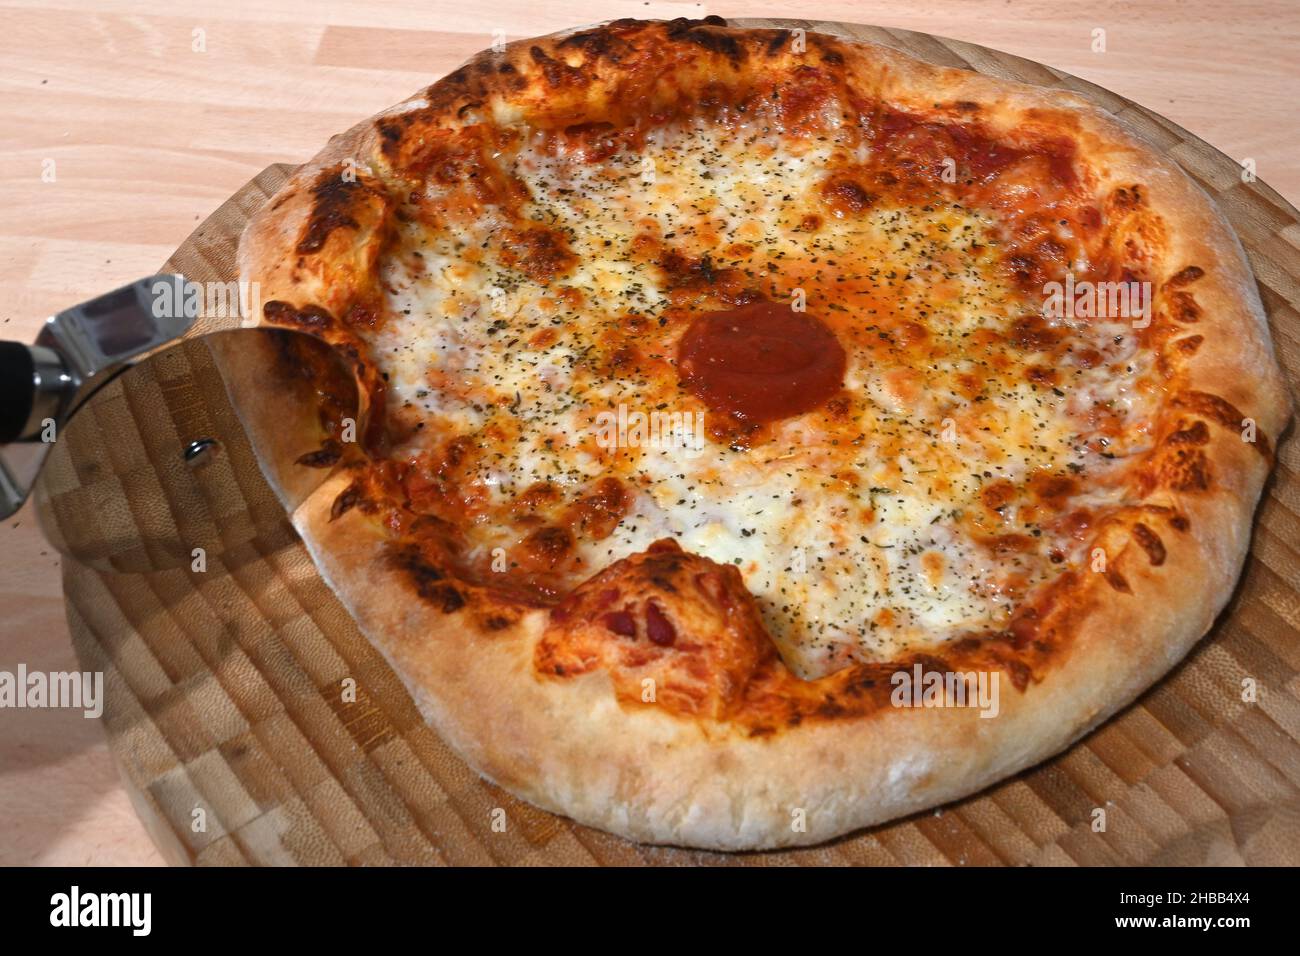 stone baked Neapolitan pizza cooked in a pizza oven Stock Photo